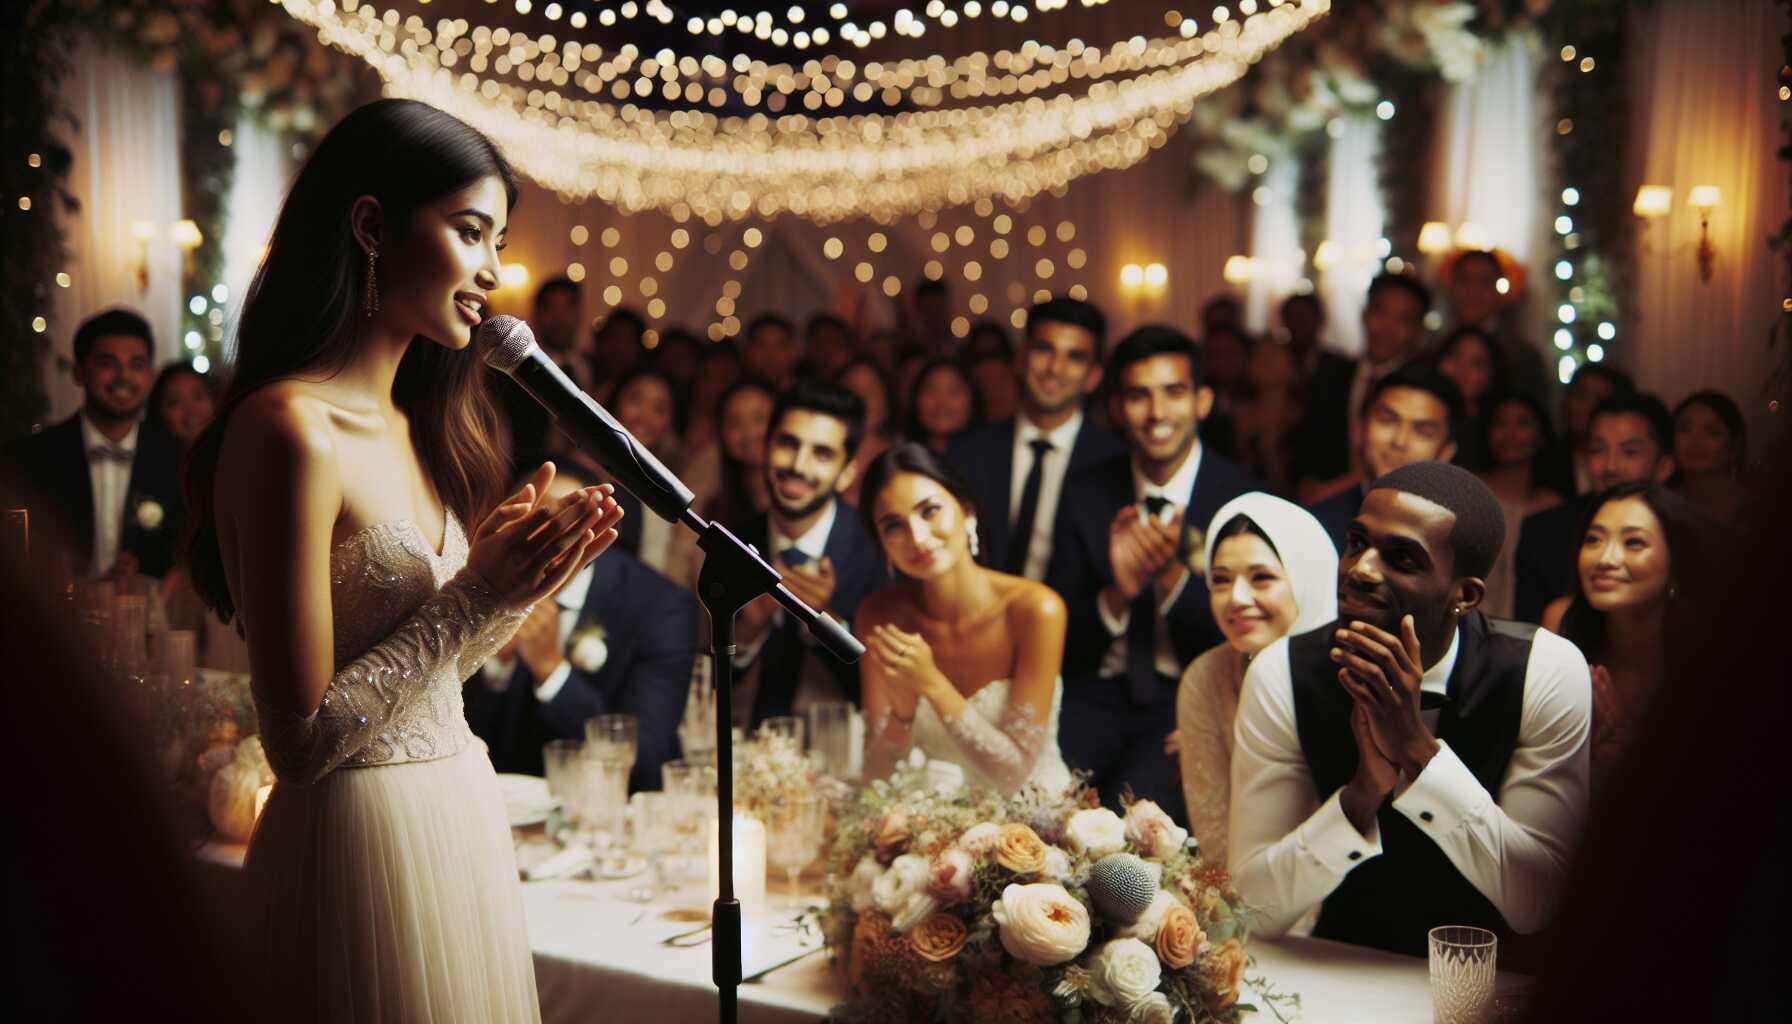 5 Heartfelt Sample Maid of Honor Speeches for Your Sister's Big Day